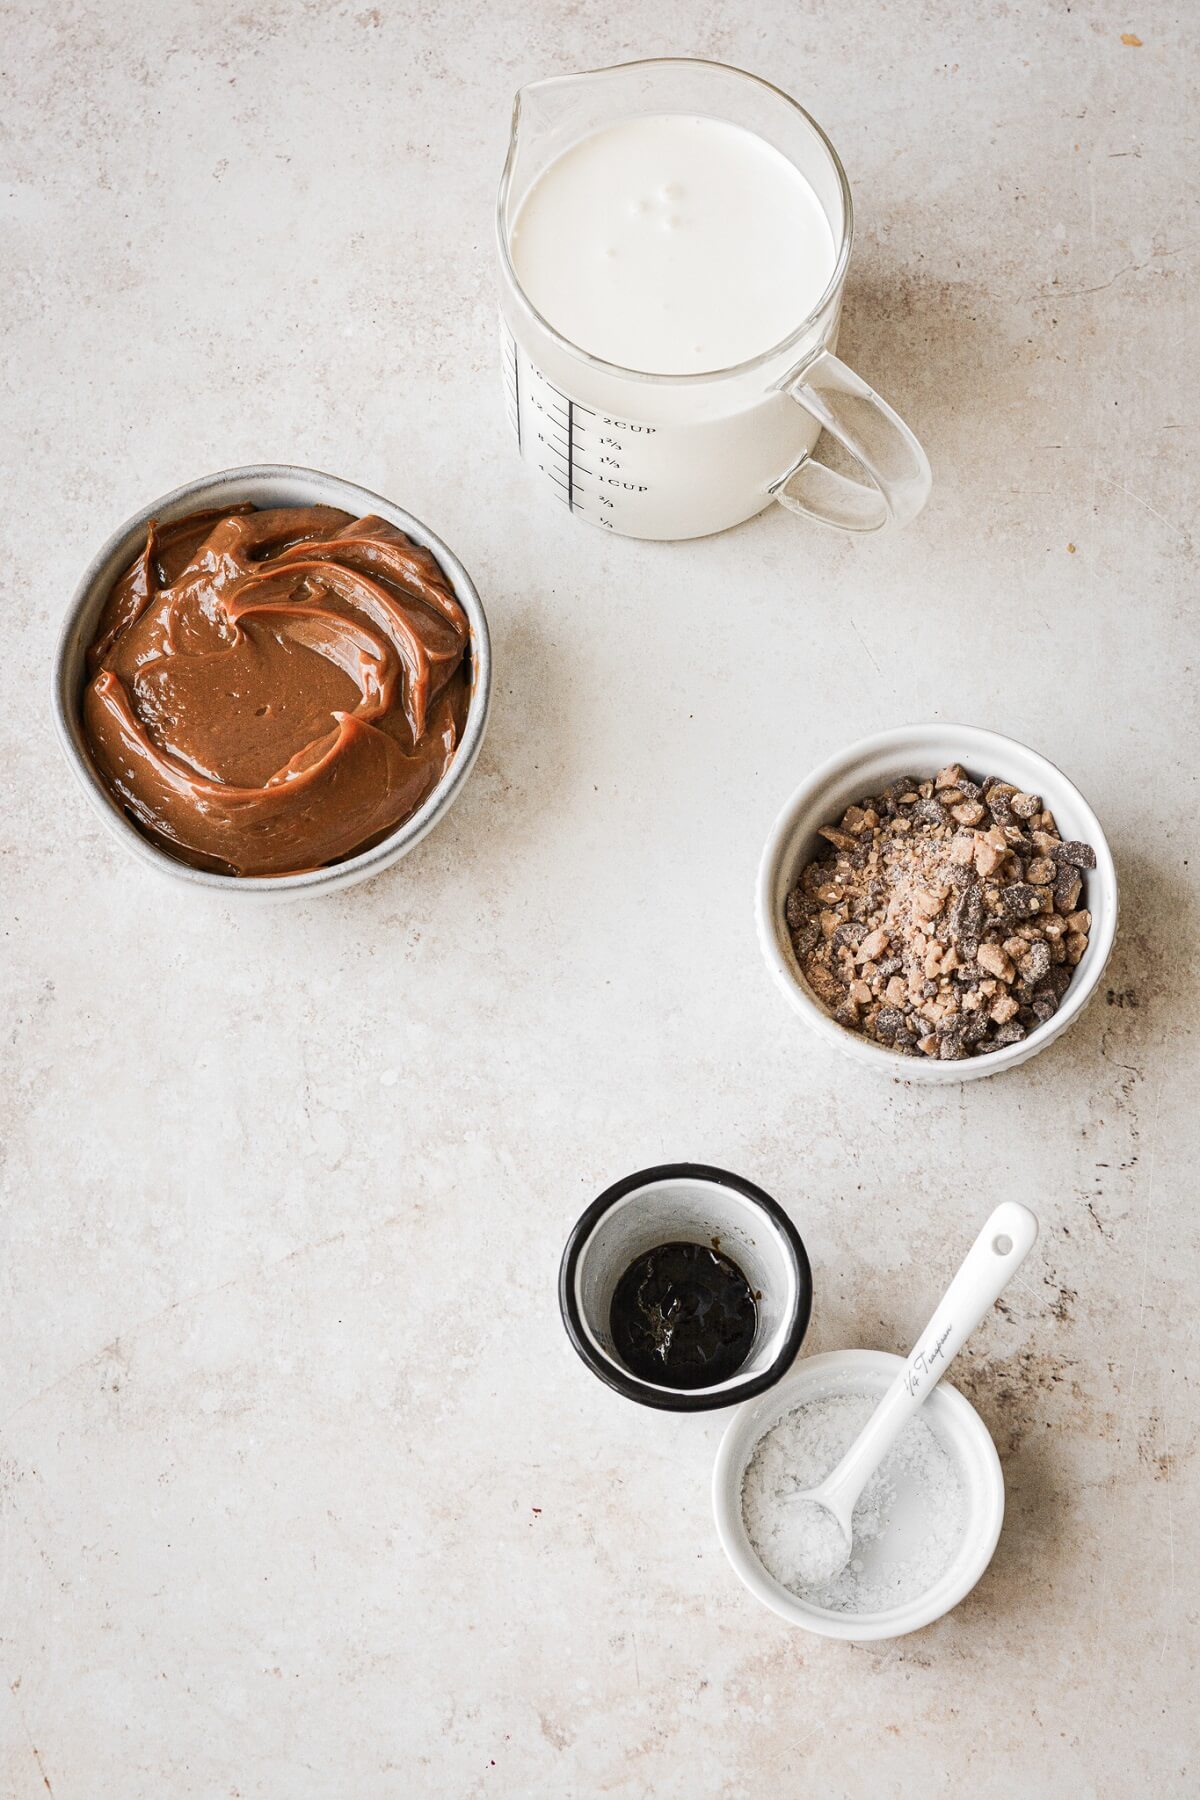 Ingredients for making dulce de leche toffee ice cream.